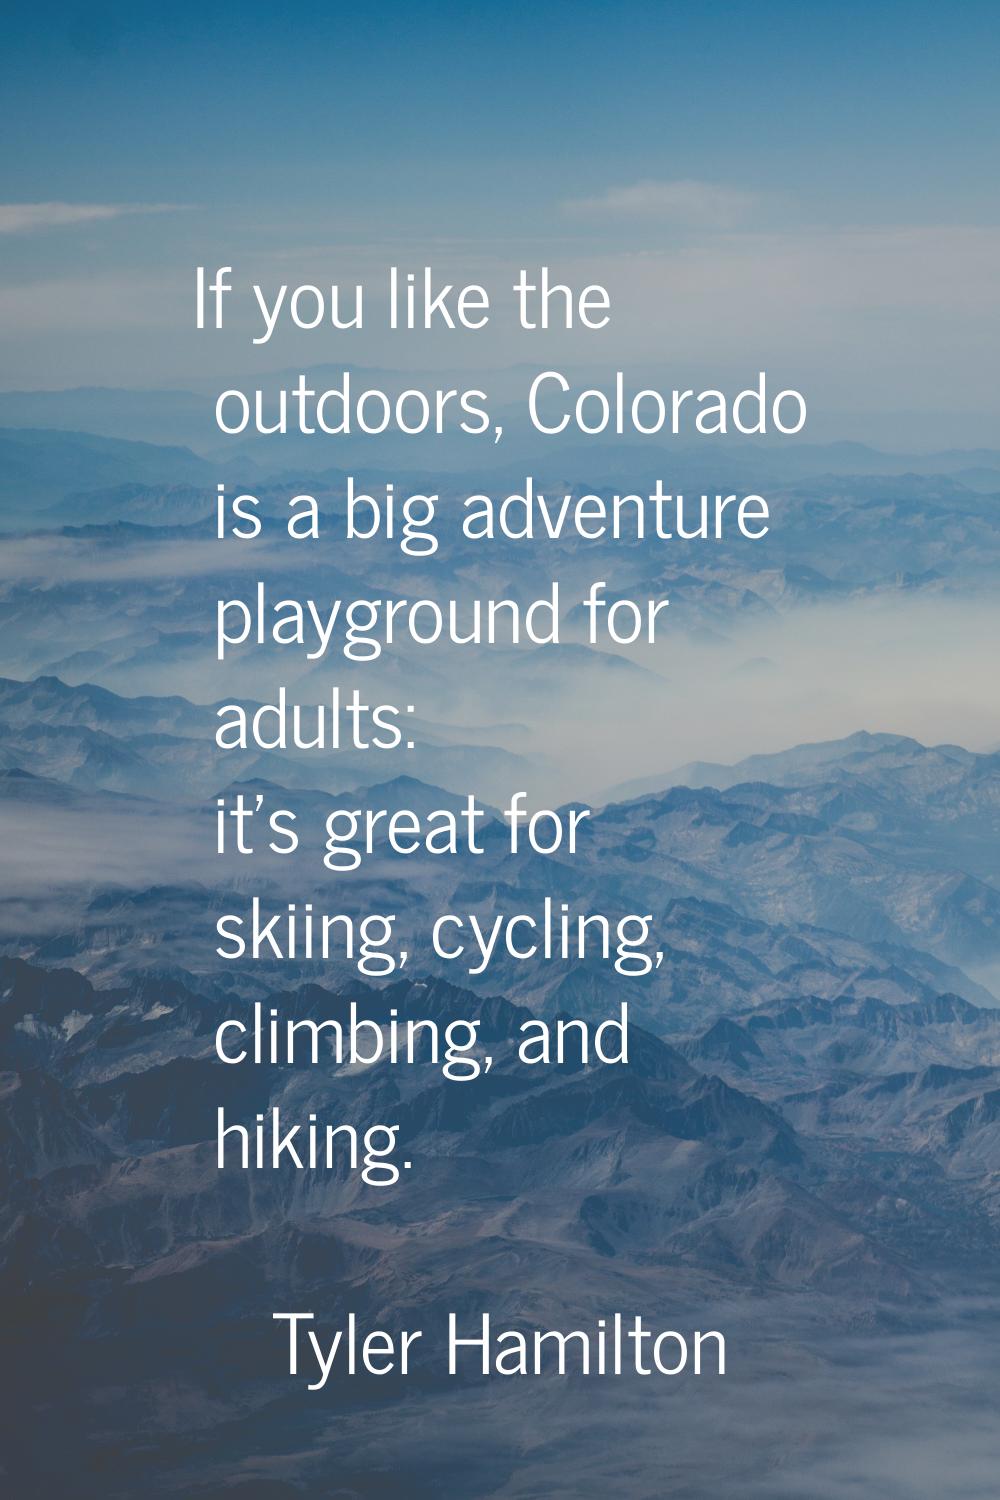 If you like the outdoors, Colorado is a big adventure playground for adults: it's great for skiing,